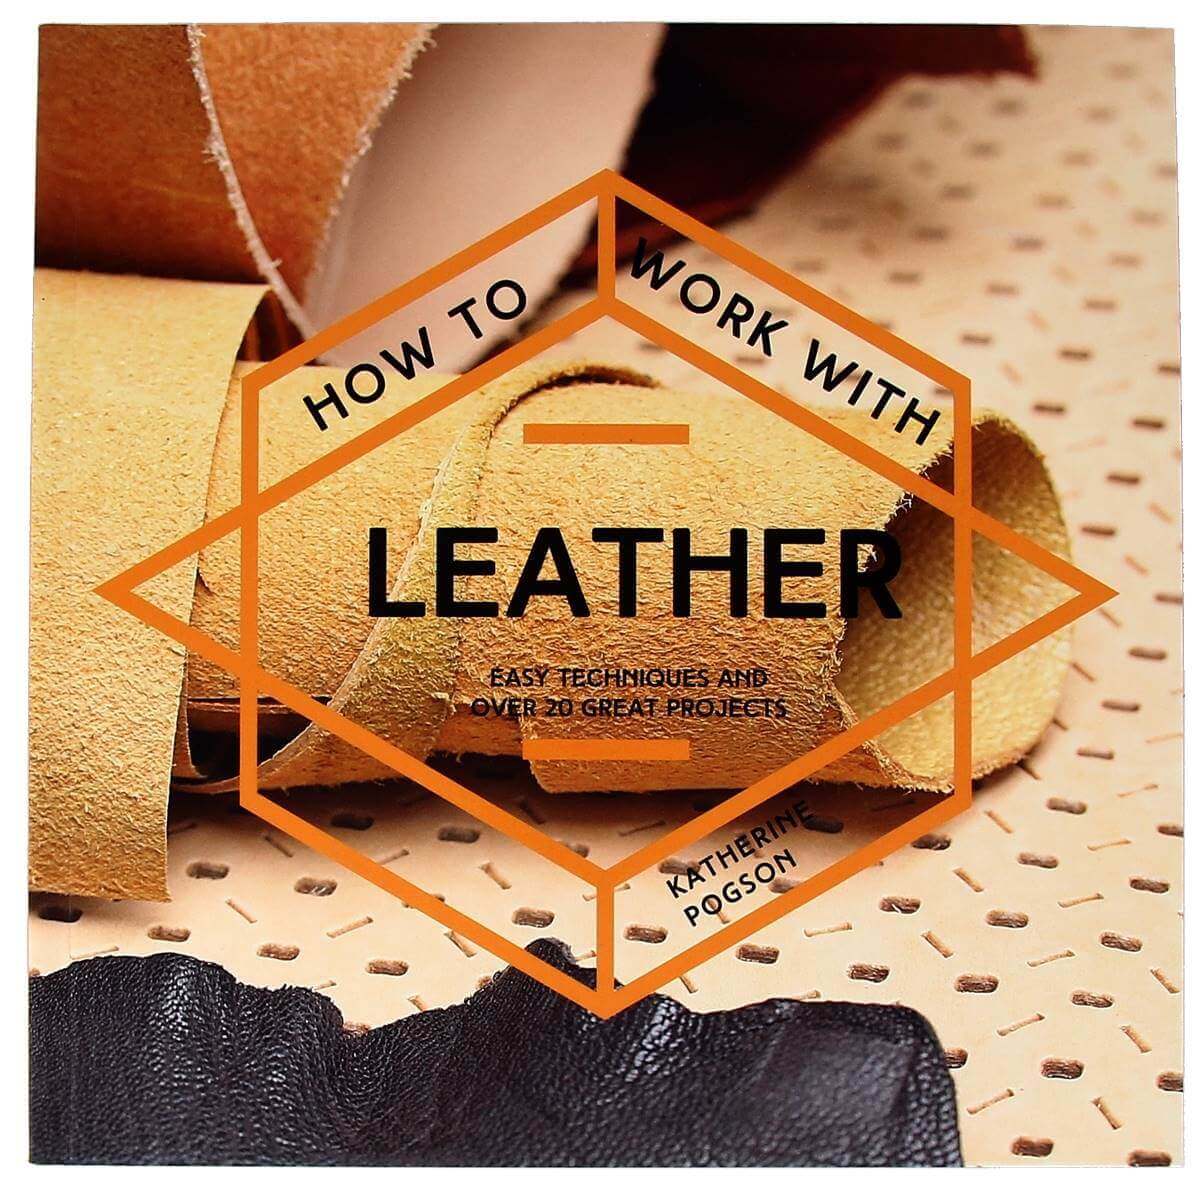 Livre "HOW TO WORK WITH LEATHER" - Comment travailler le cuir